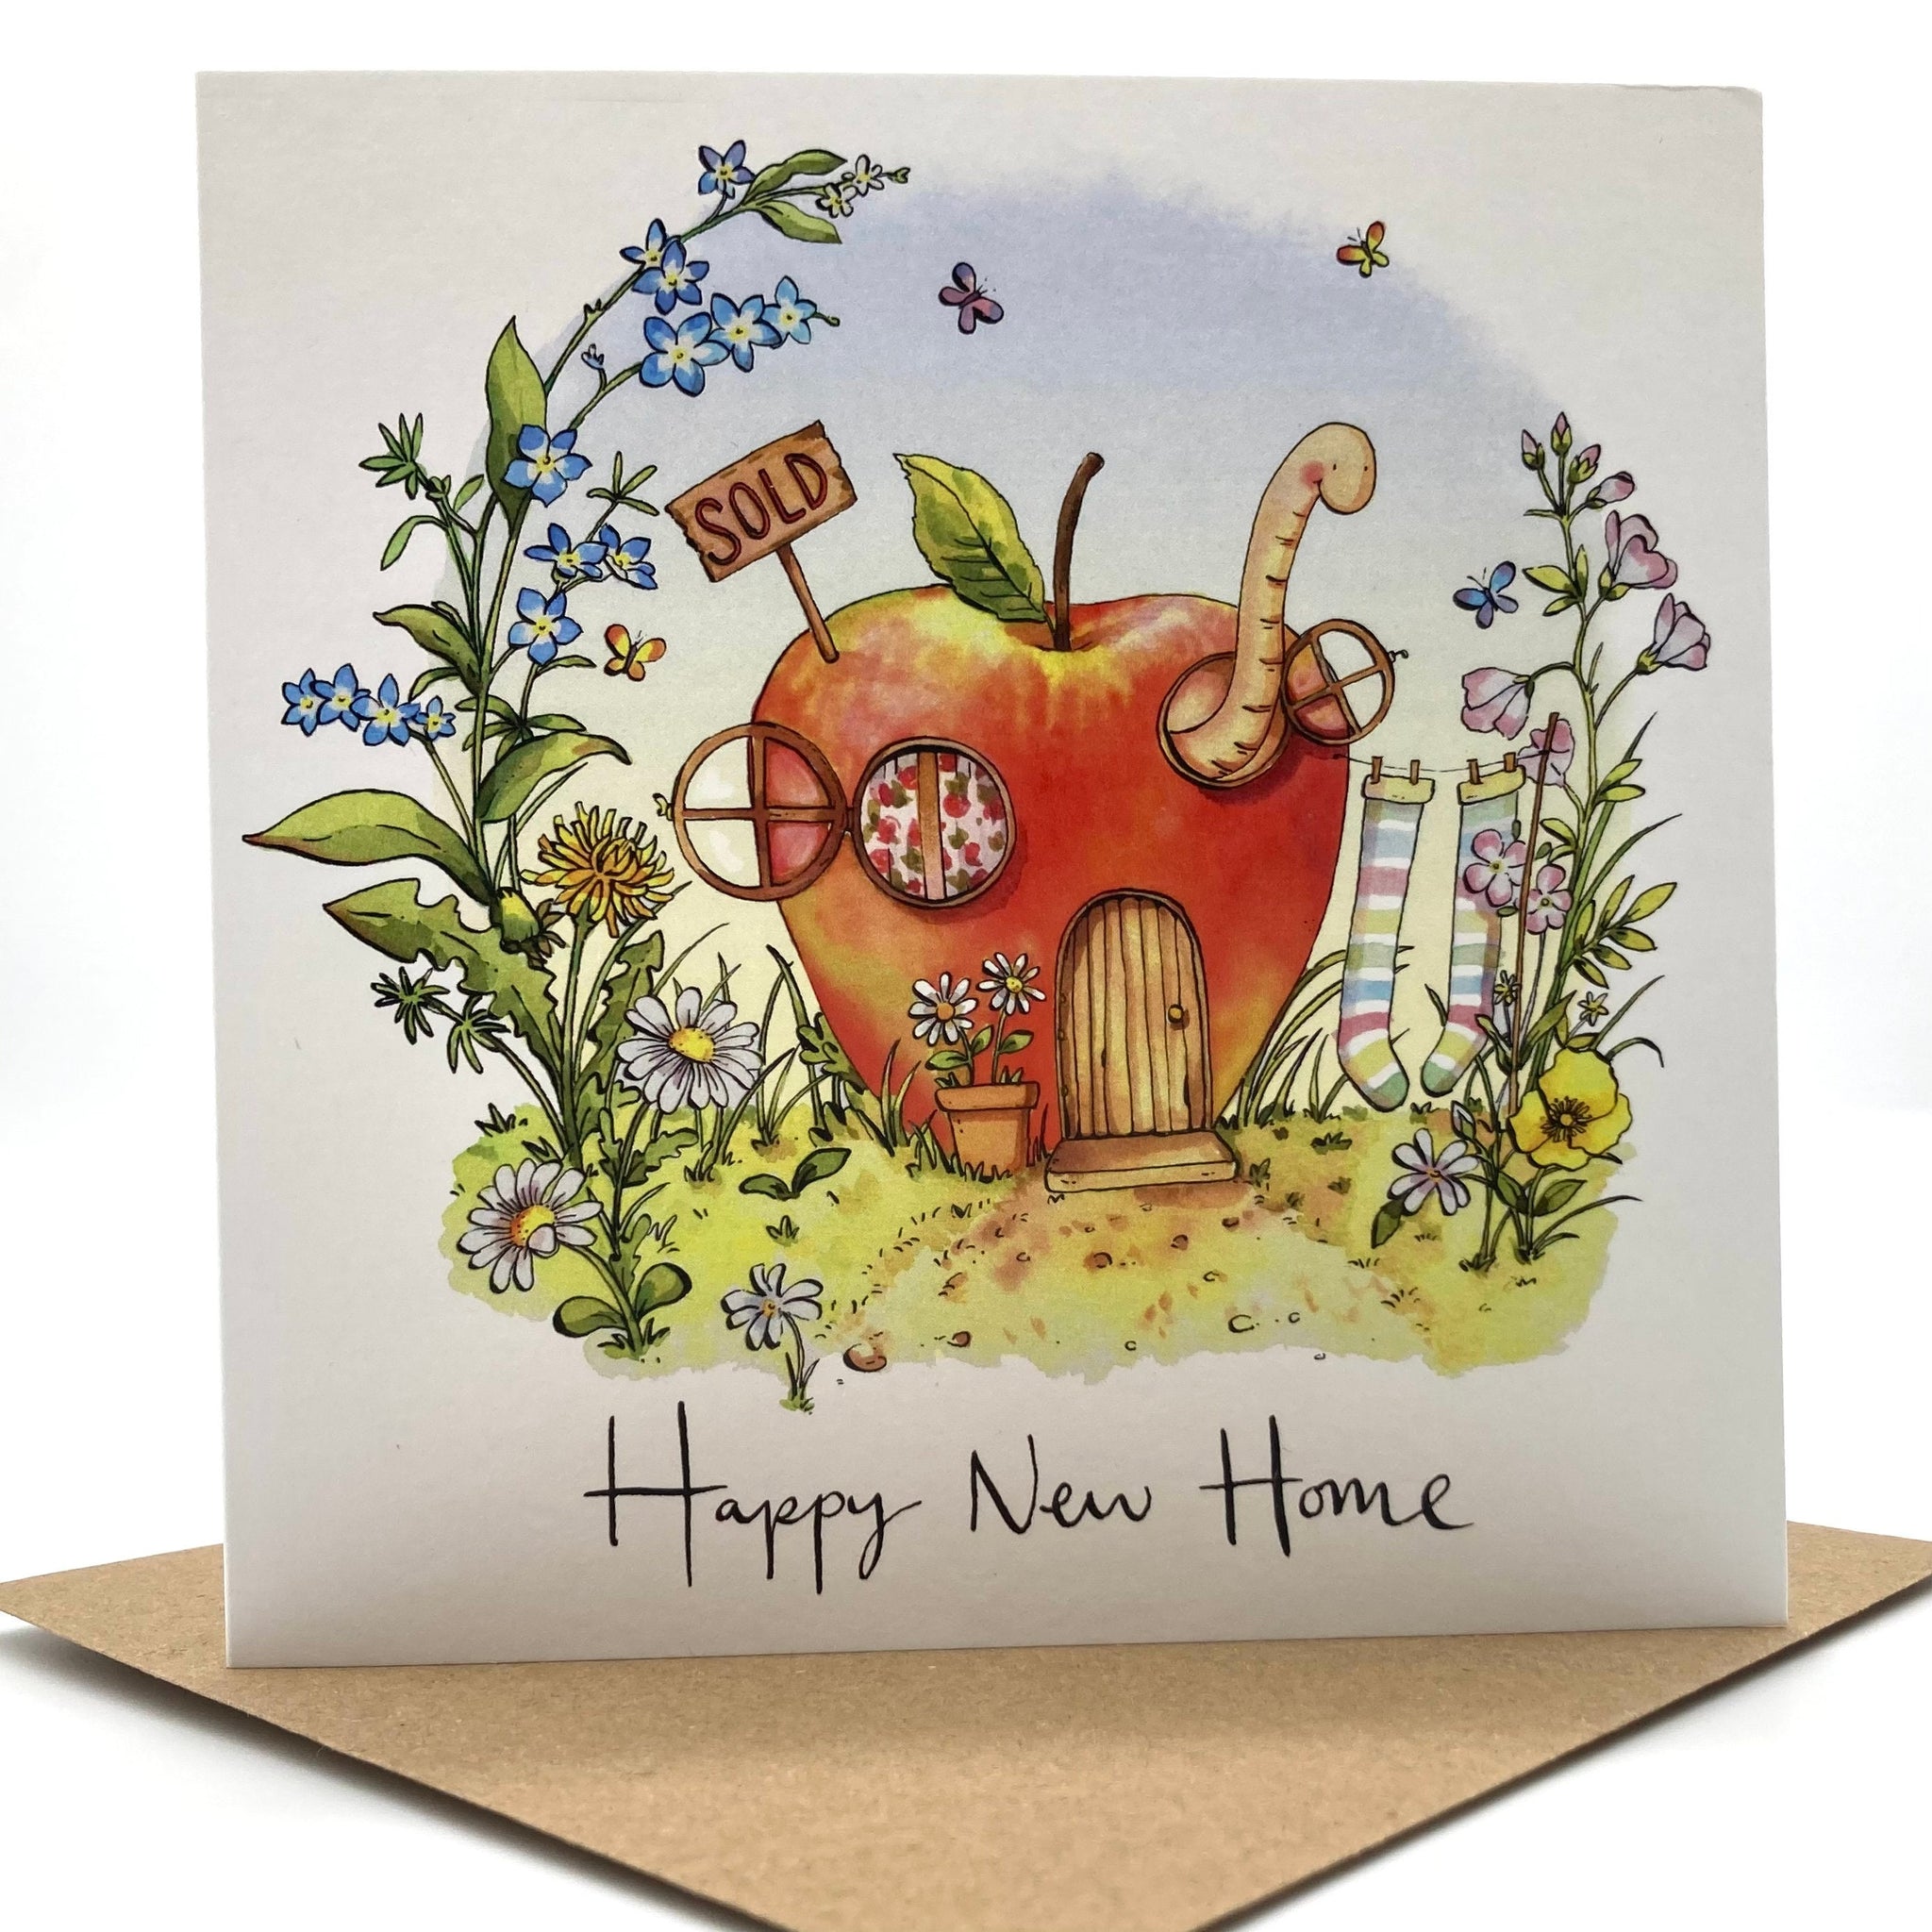 New Home Card - Worms New Home